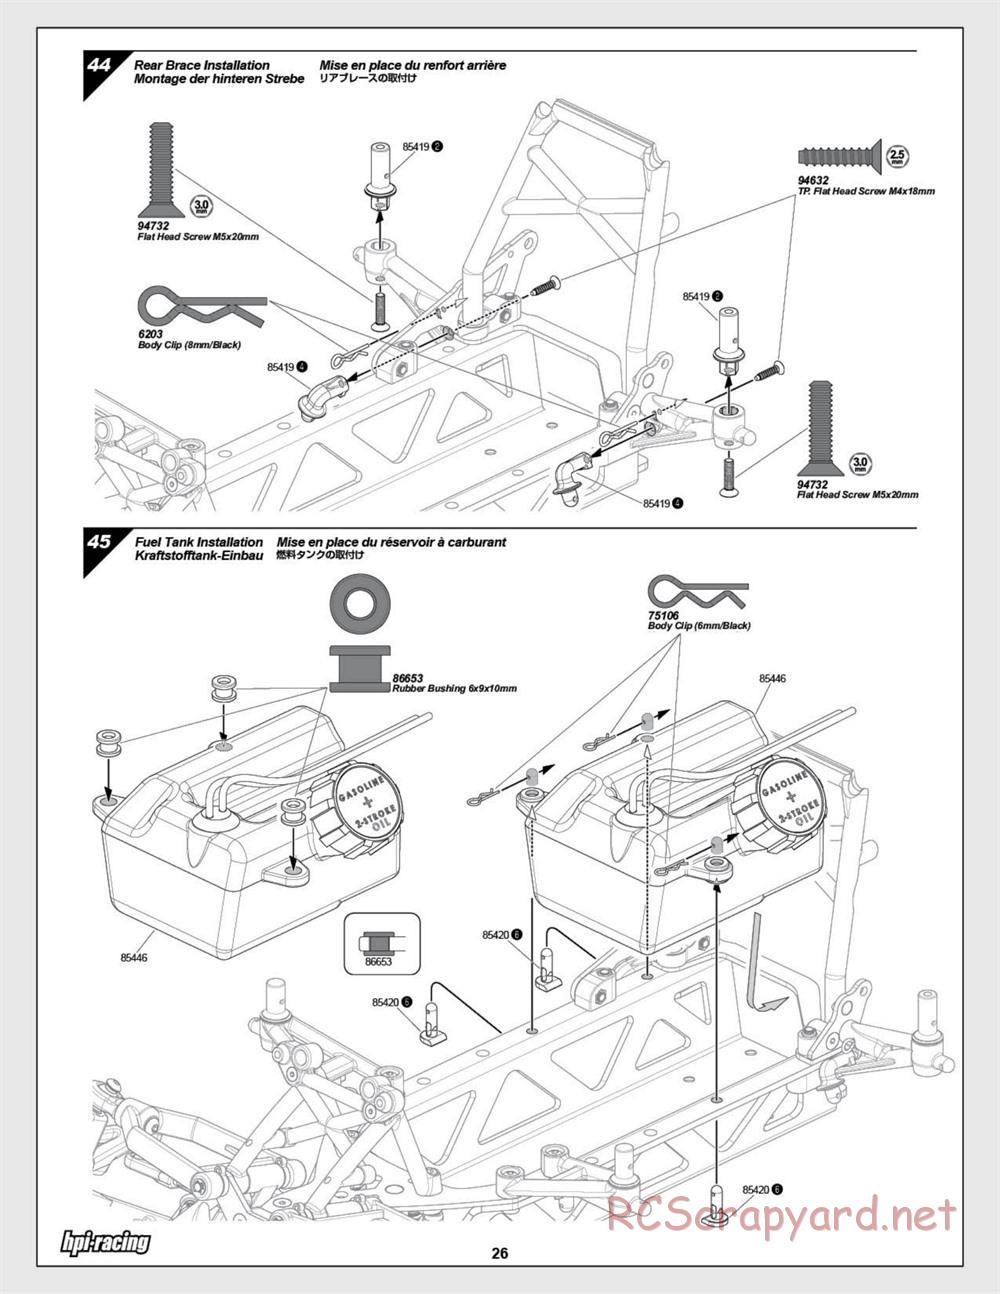 HPI - Baja 5SC SS - Exploded View - Page 26